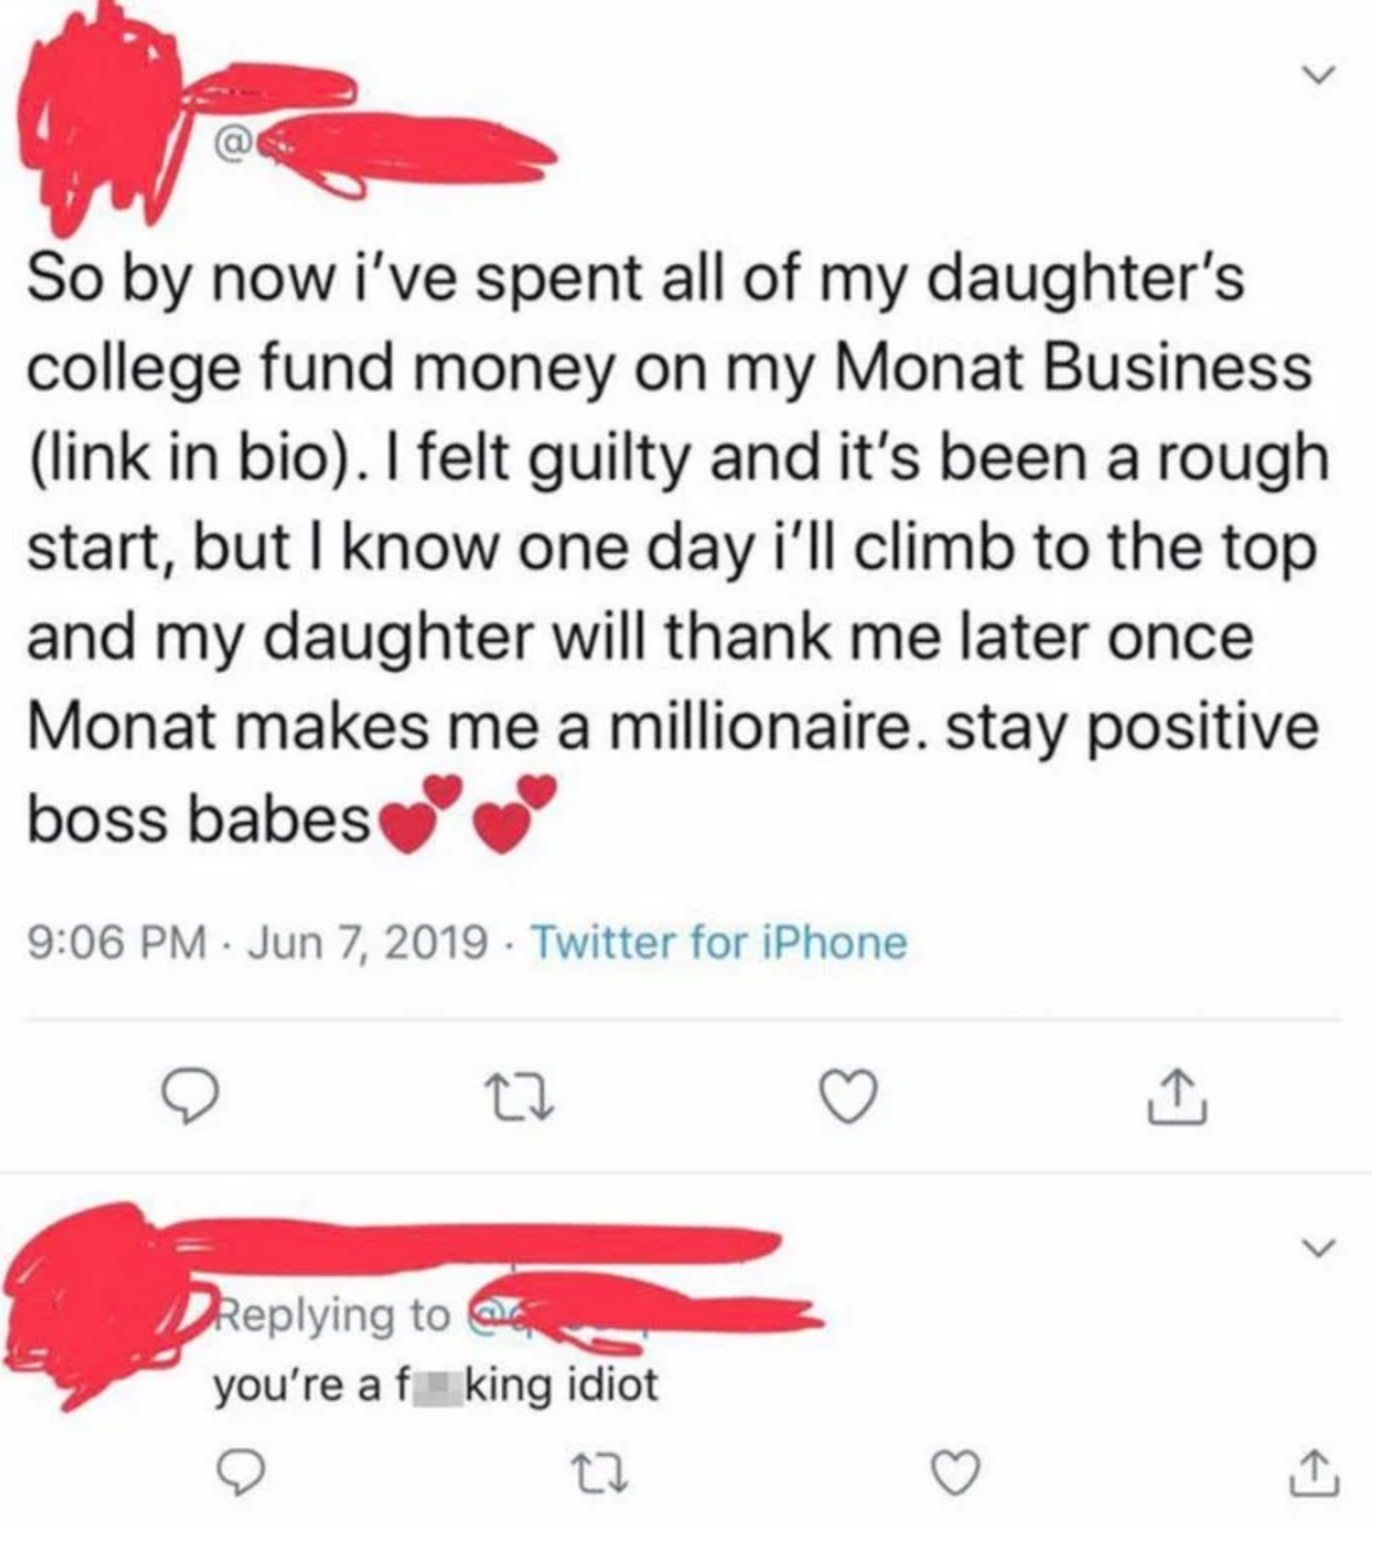 north warwickshire borough council - @ So by now i've spent all of my daughter's college fund money on my Monat Business link in bio. I felt guilty and it's been a rough start, but I know one day i'll climb to the top and my daughter will thank me later o